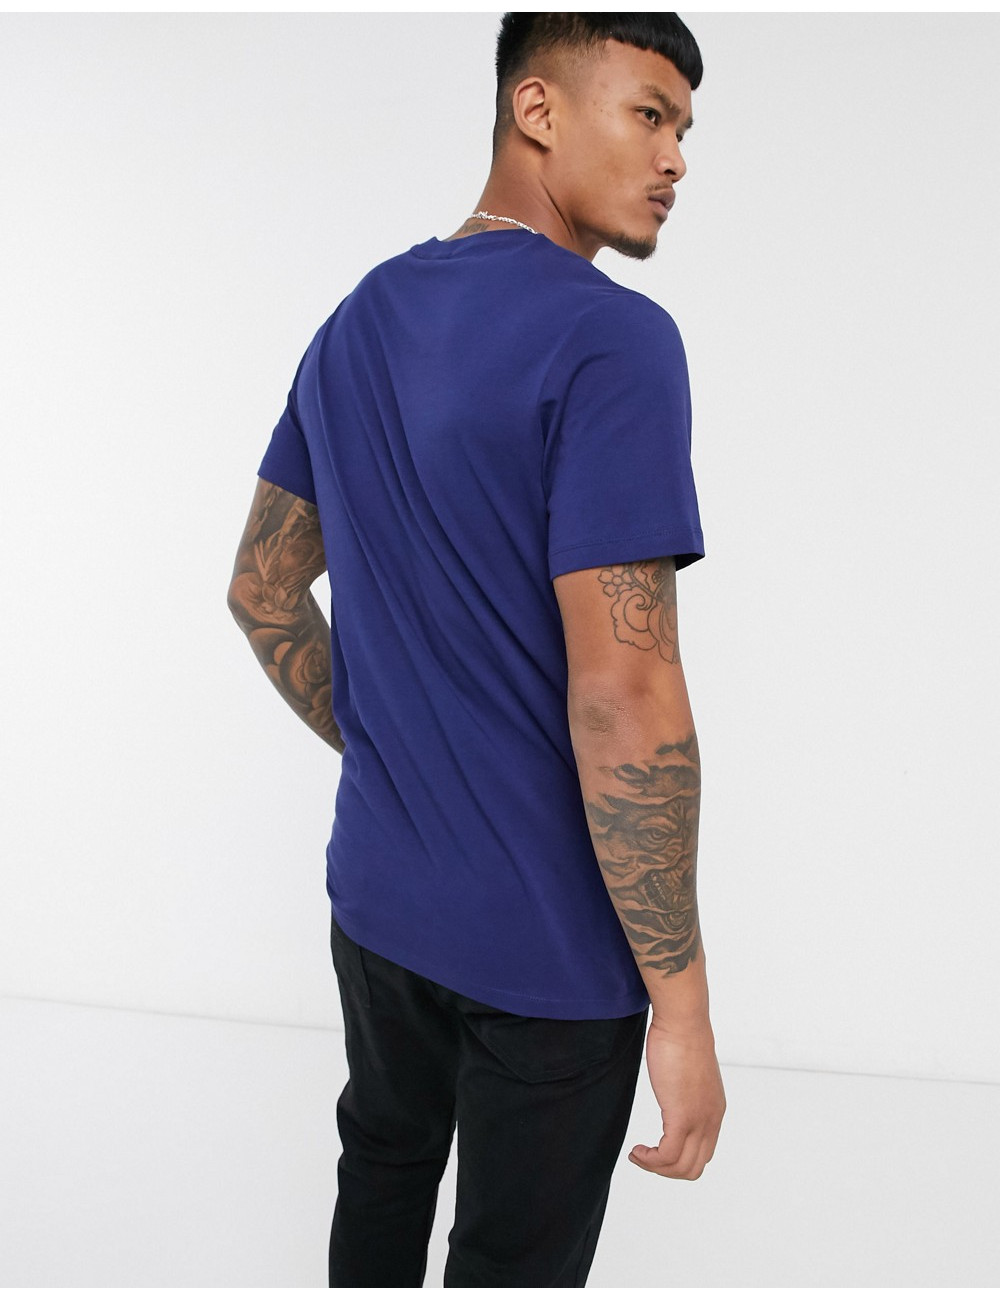 G-Star cut and sew t-shirt...